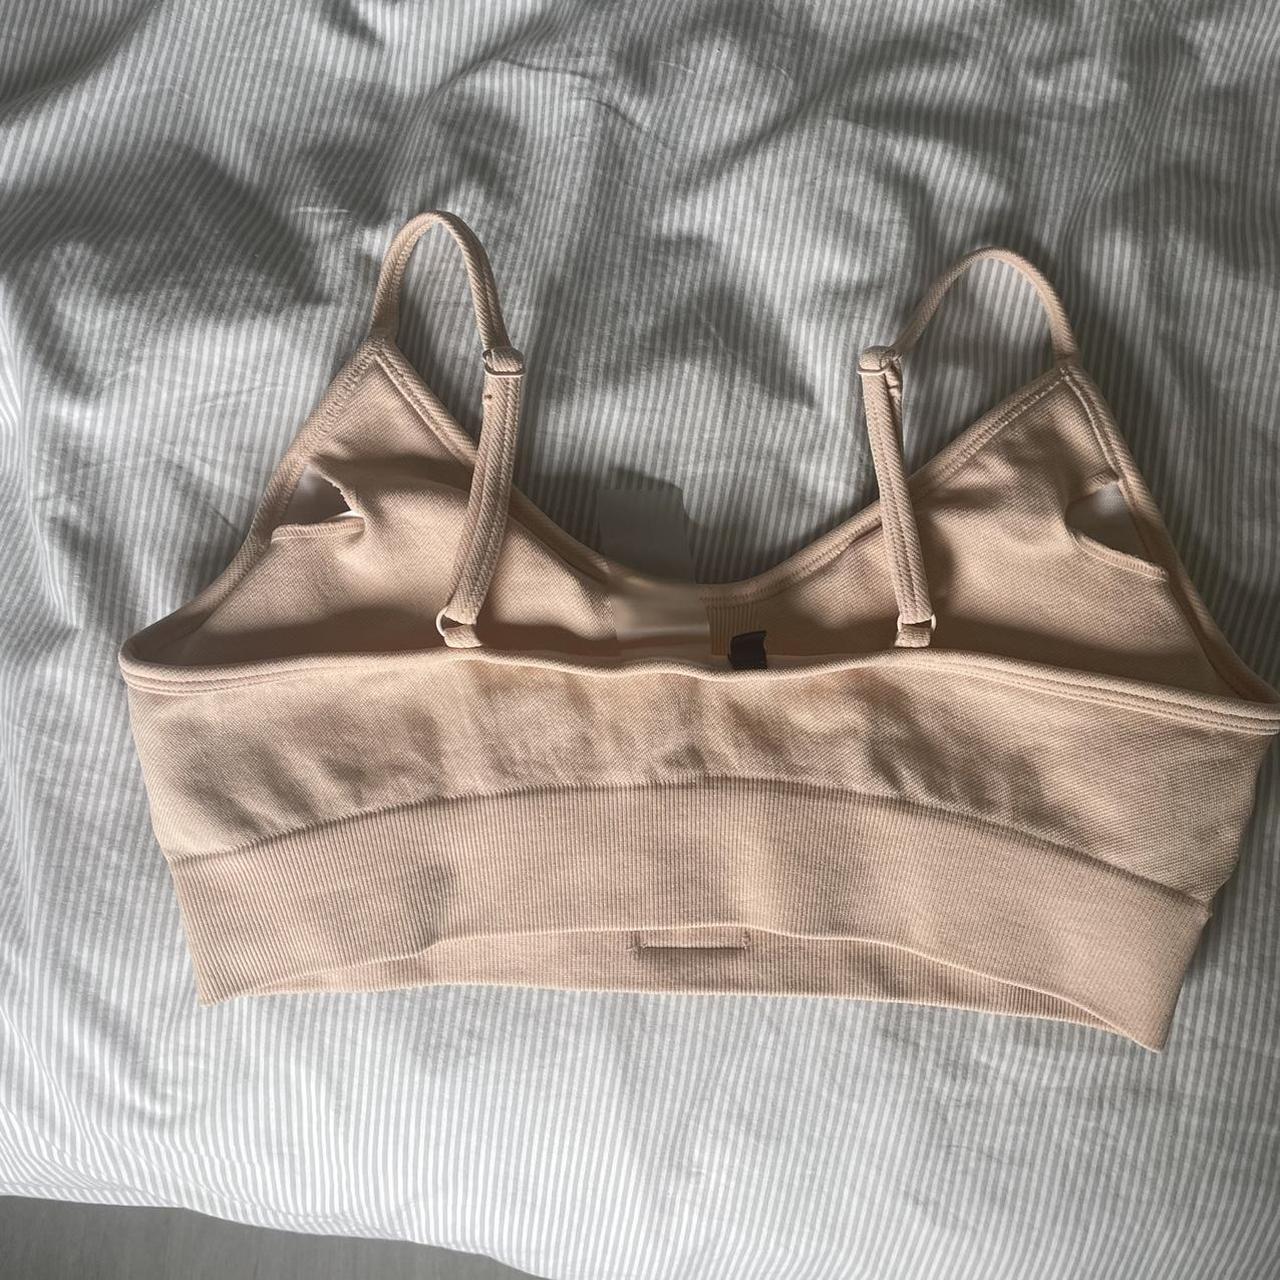 Bo&Tee sports bra size washed off the label but was... - Depop